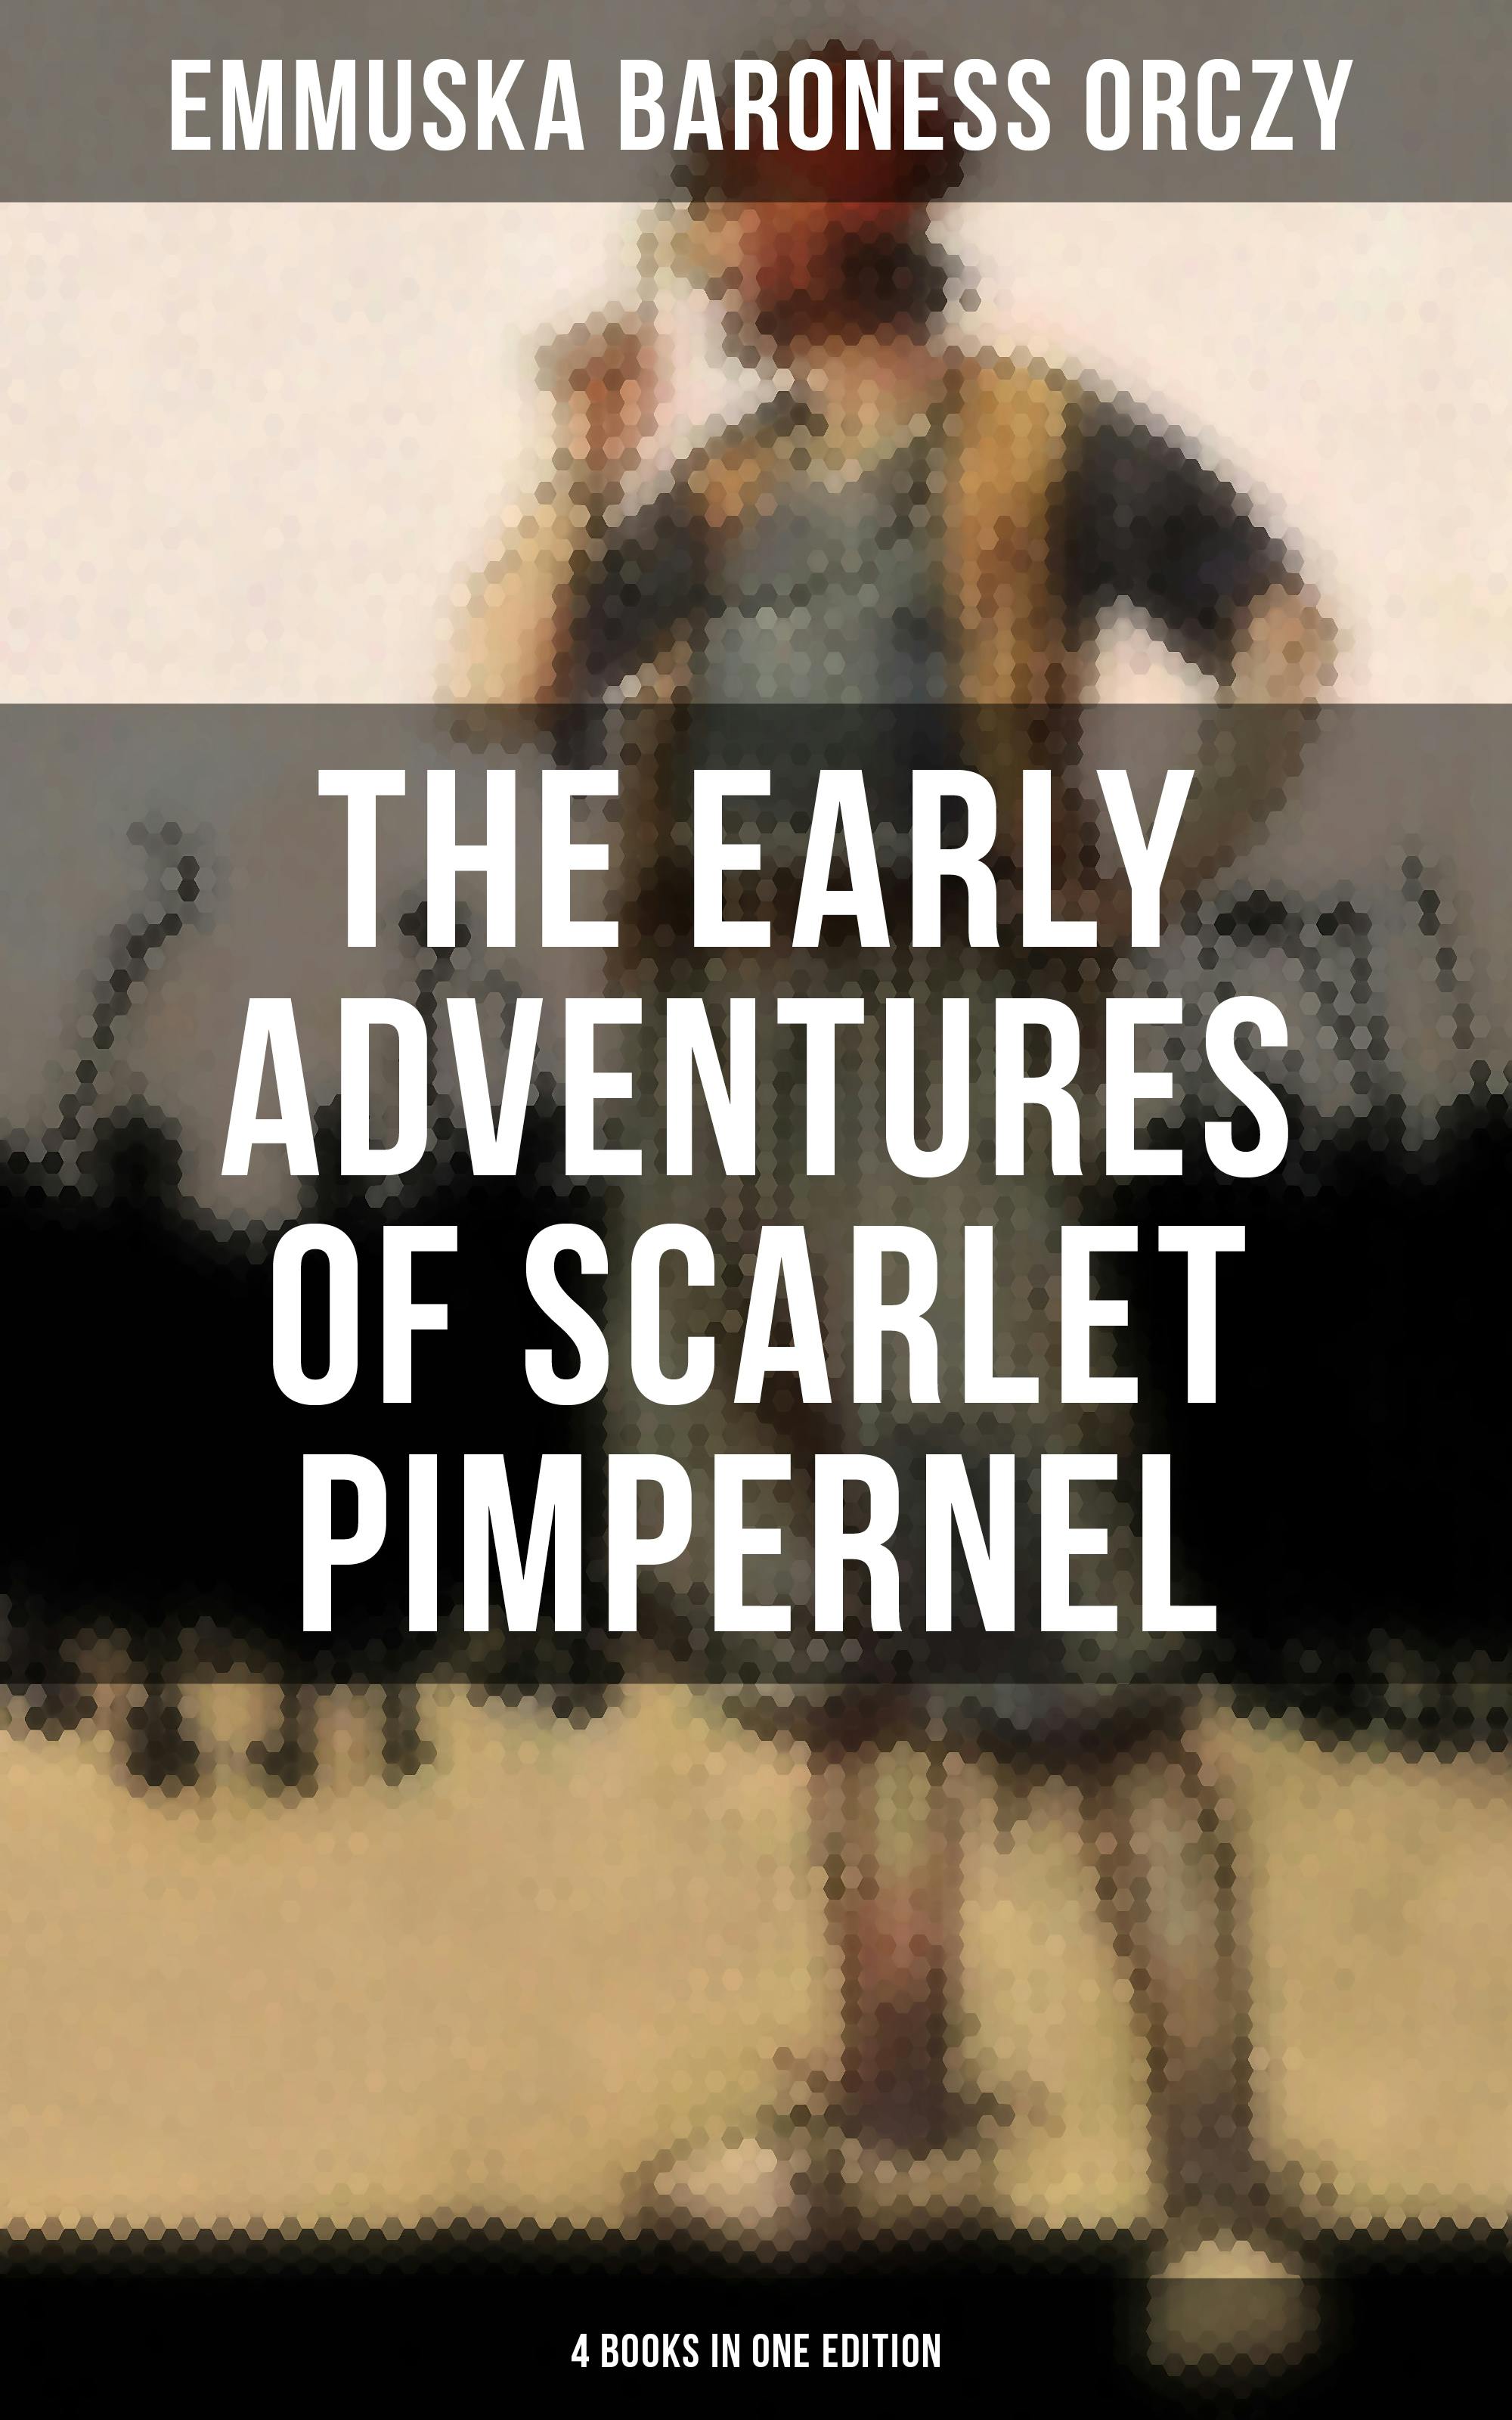 The Early Adventures of Scarlet Pimpernel - 4 Books in One Edition: Scarlet Pimpernel, The Elusive Pimpernel, The League & The Triumph of the Scarlet Pimpernel - Baroness Emmuska Orczy